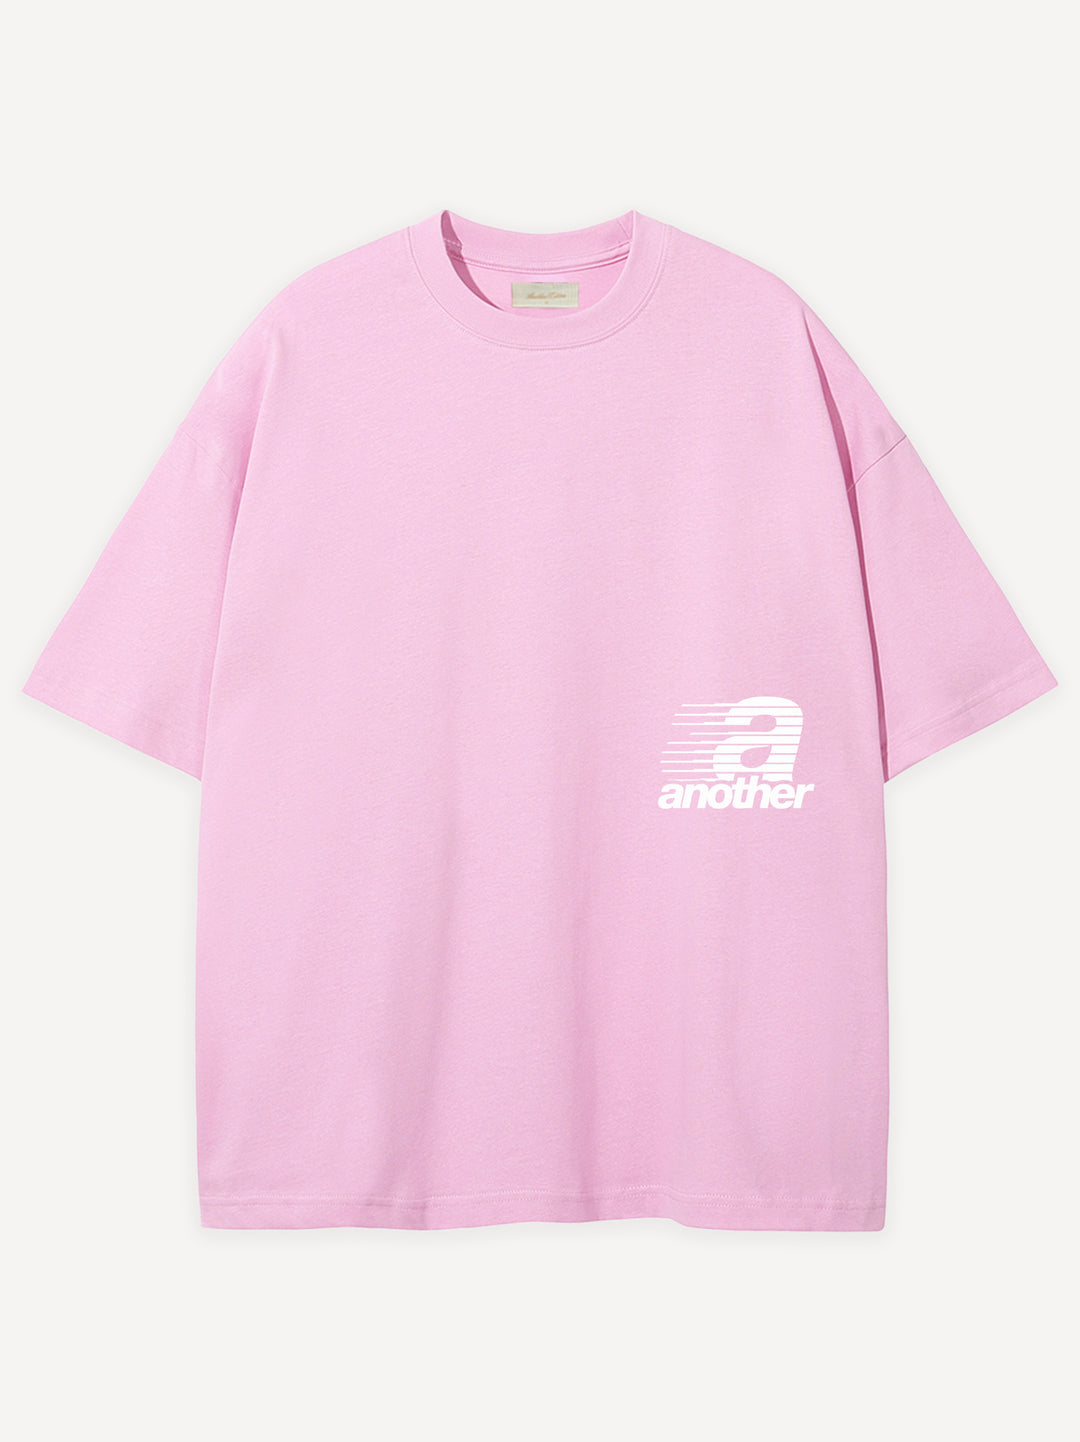 Another Soccer Oversize T-Shirt